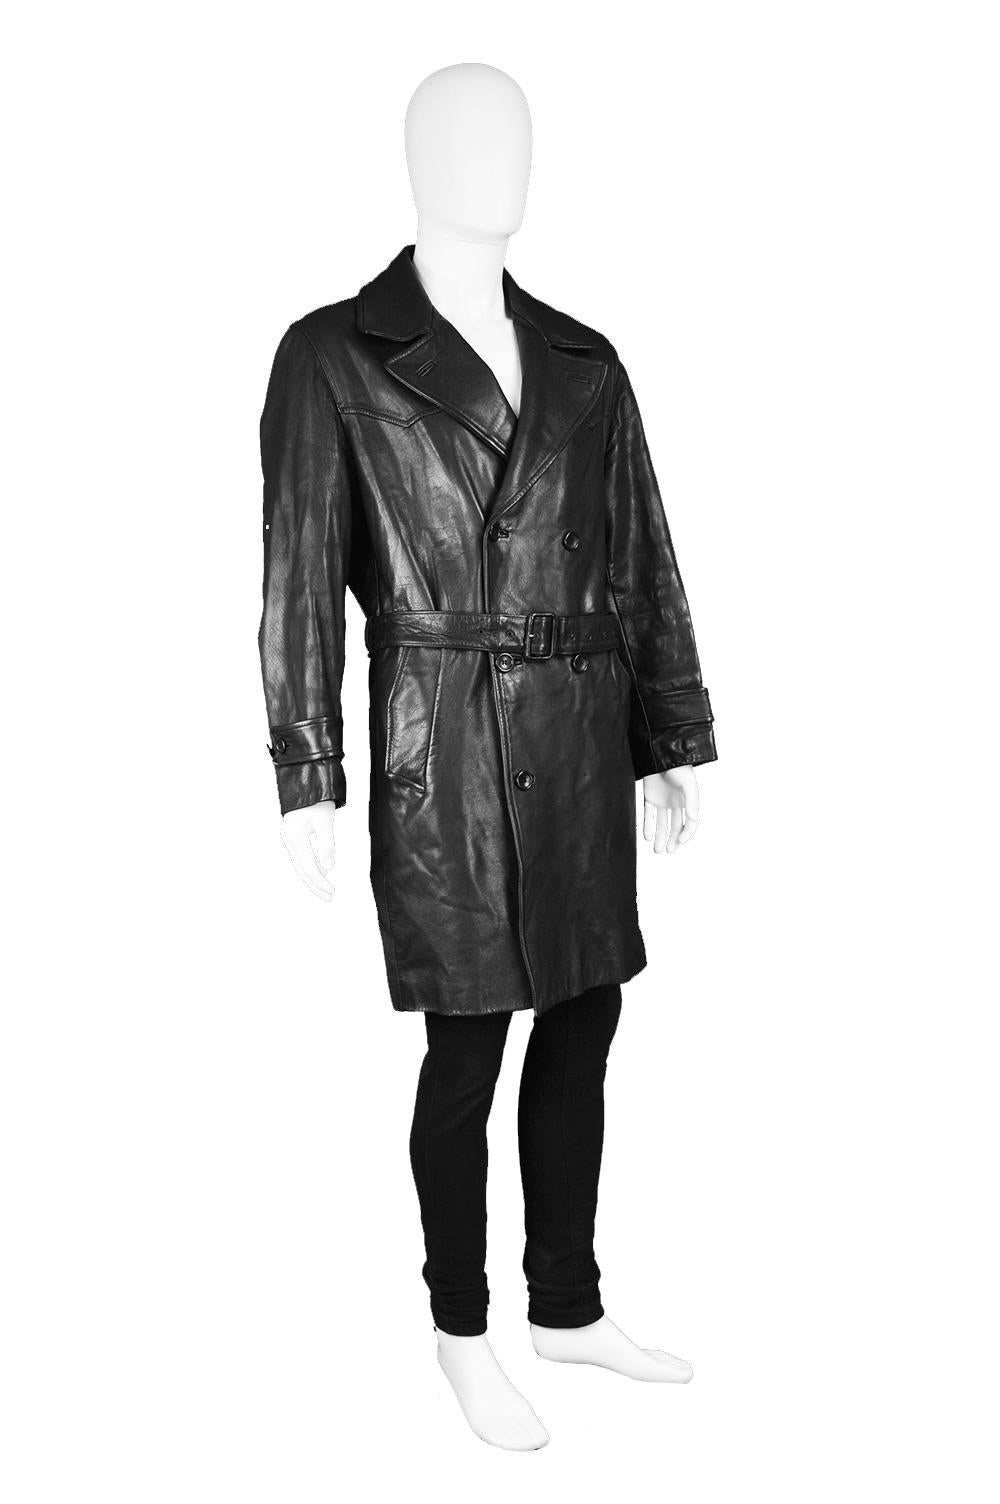 Kenzo Vintage Men's Black Goat Leather Vintage Belted Jacket Trench Coat, 1980s In Good Condition For Sale In Doncaster, South Yorkshire